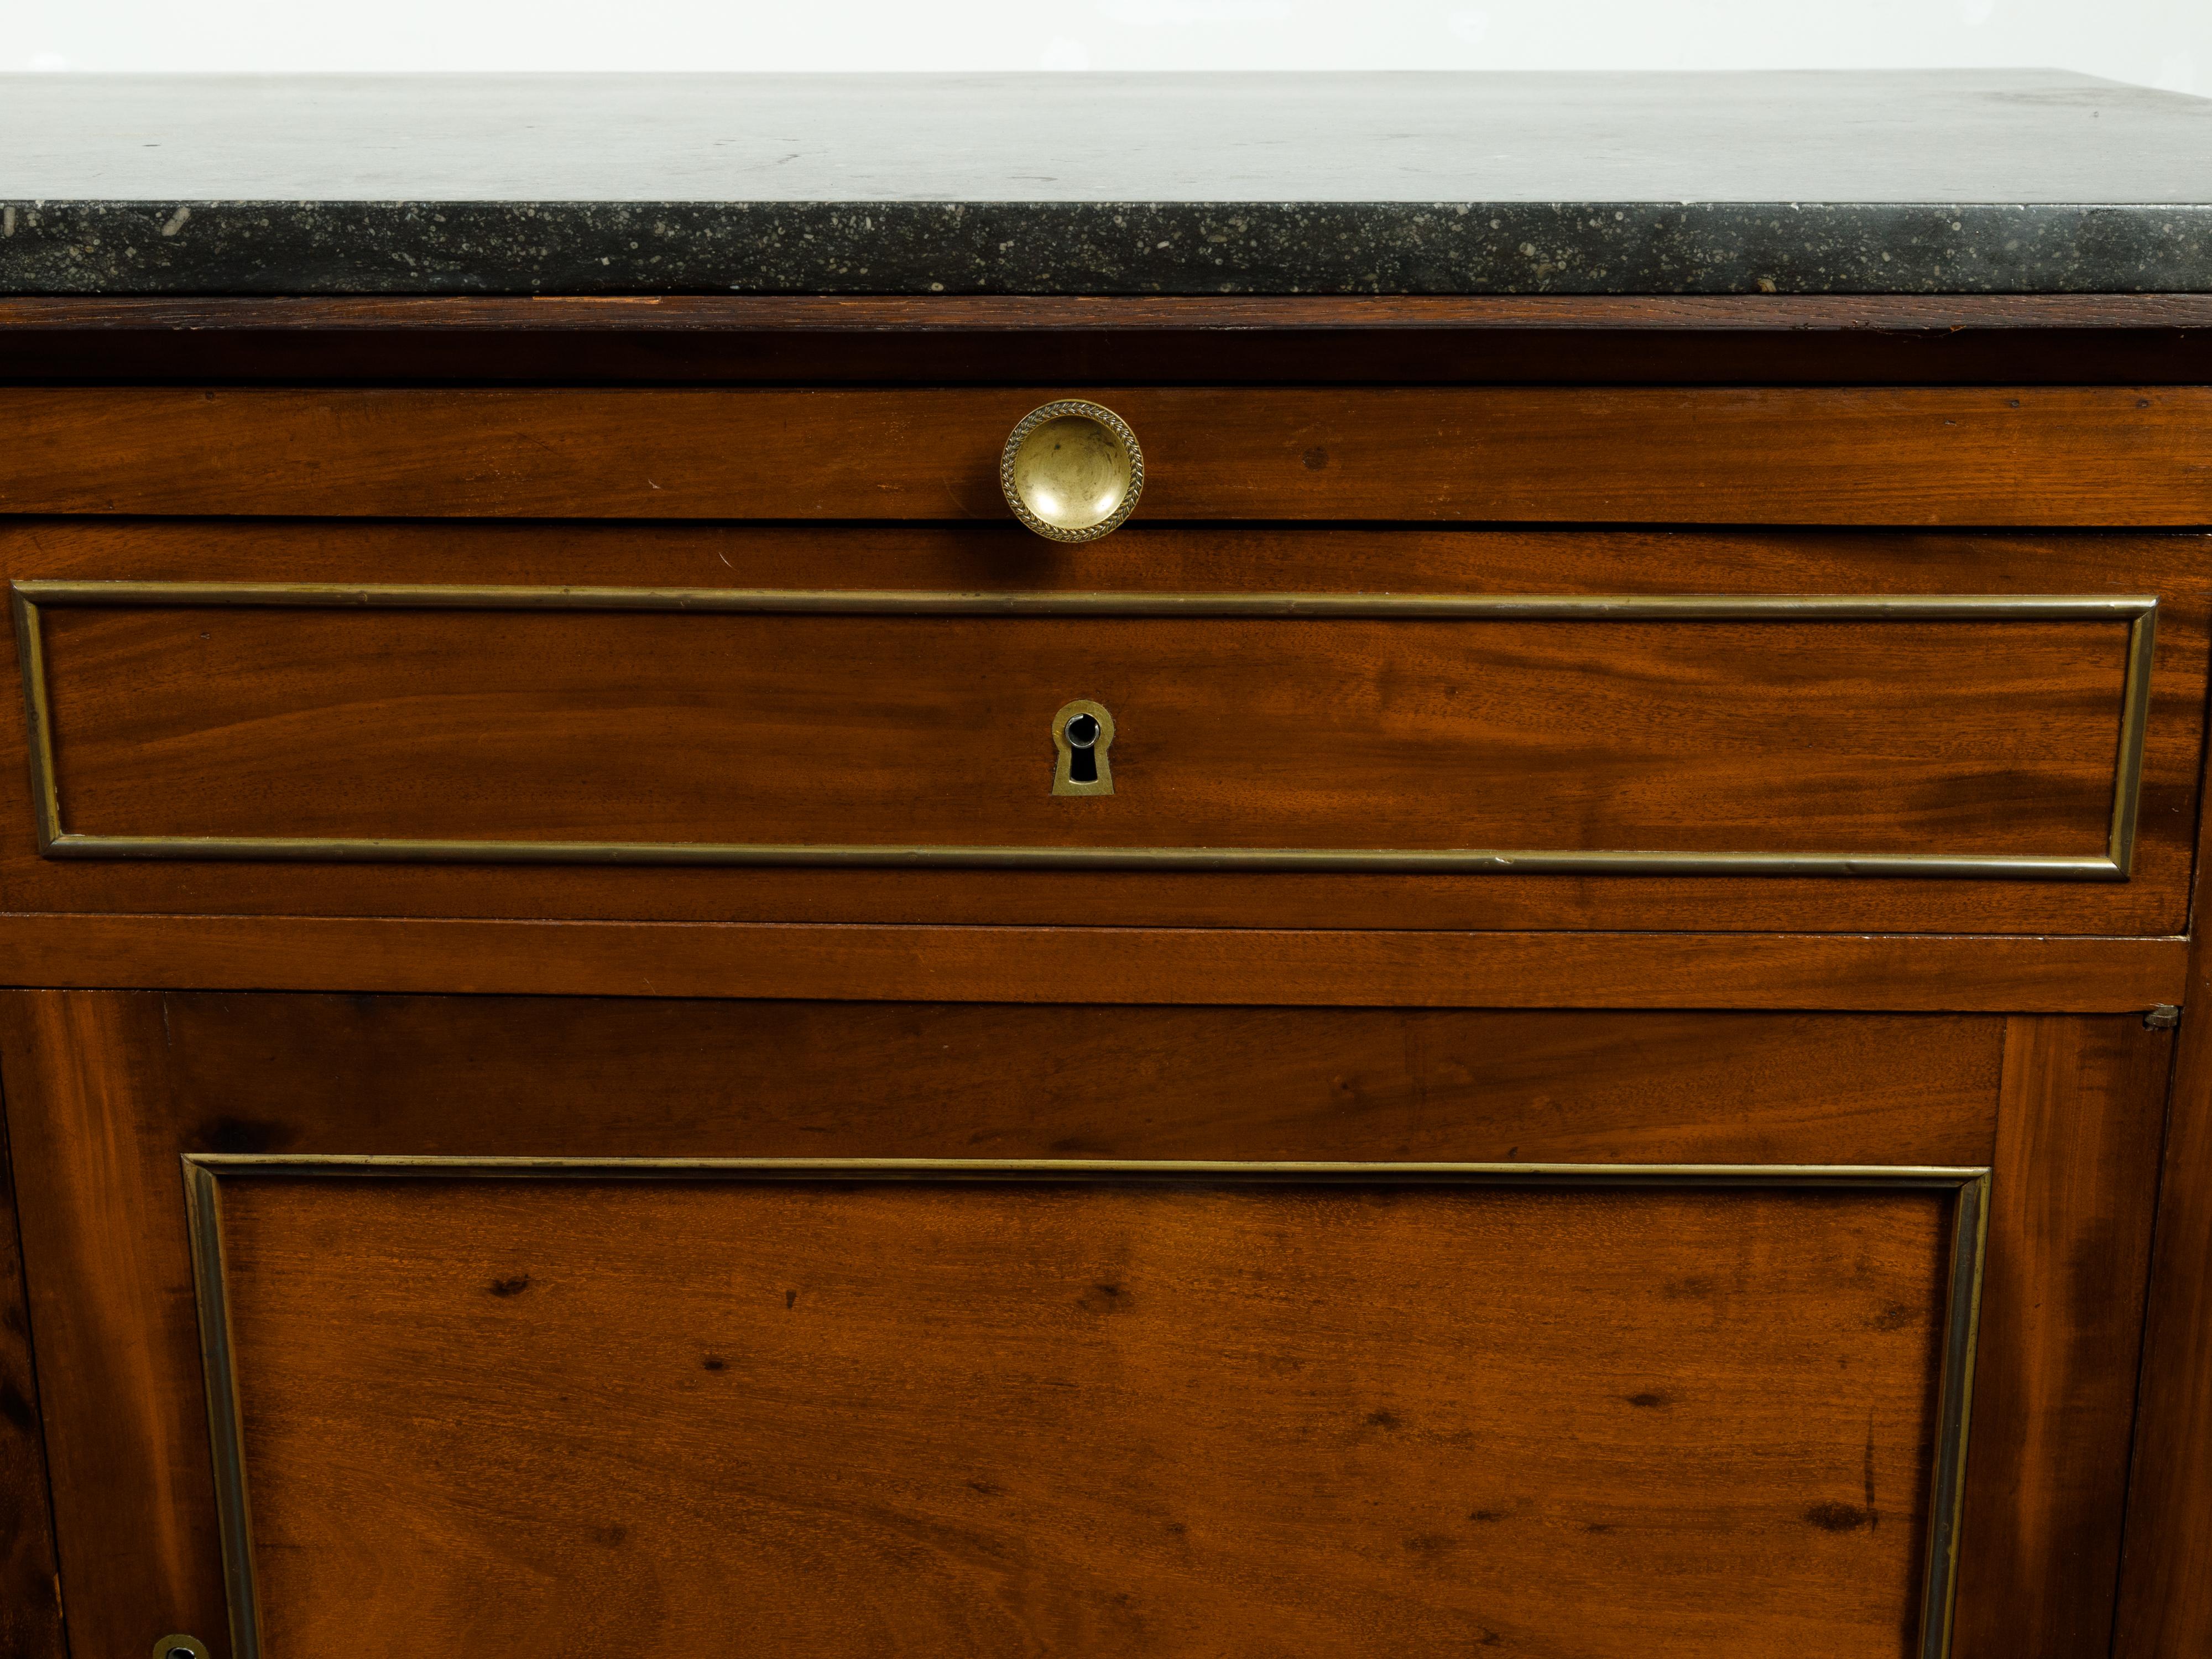 A French walnut buffet from the 19th century, with marble top, pull-out, two drawers and two doors. Created in France during the 19th century, this walnut buffet features a black marble top sitting above a pull-out drawer also fitted with marble.